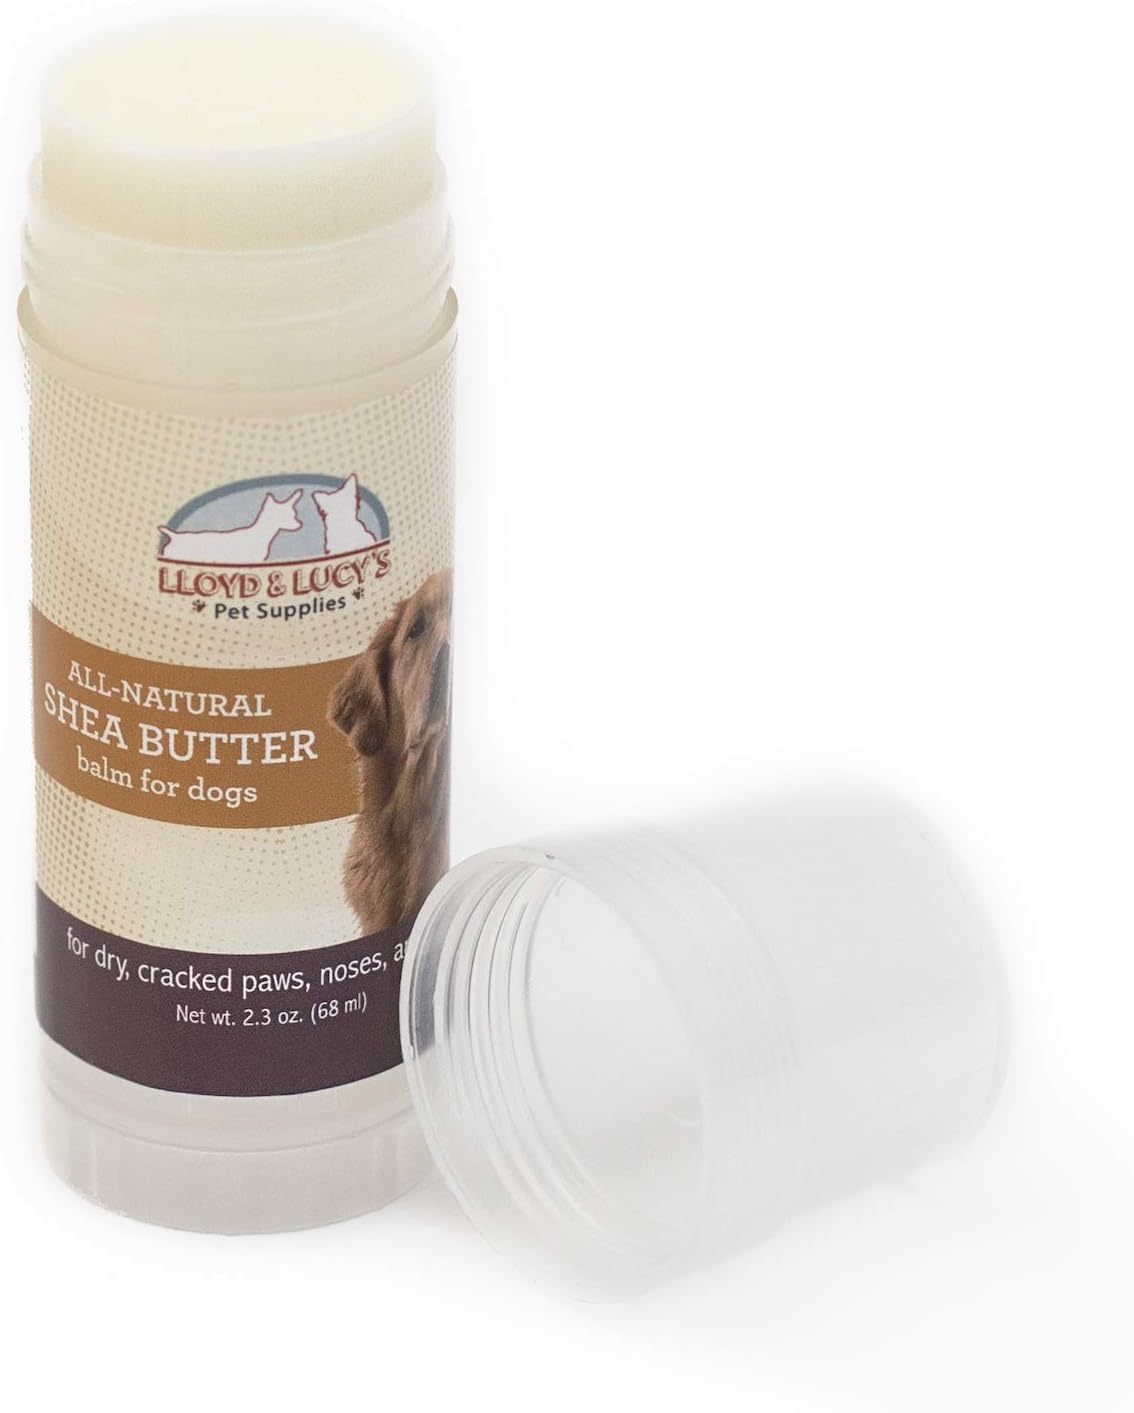 All Natural Shea Butter Balm for Dogs, Treats Dry Skin, Nose, and Paws